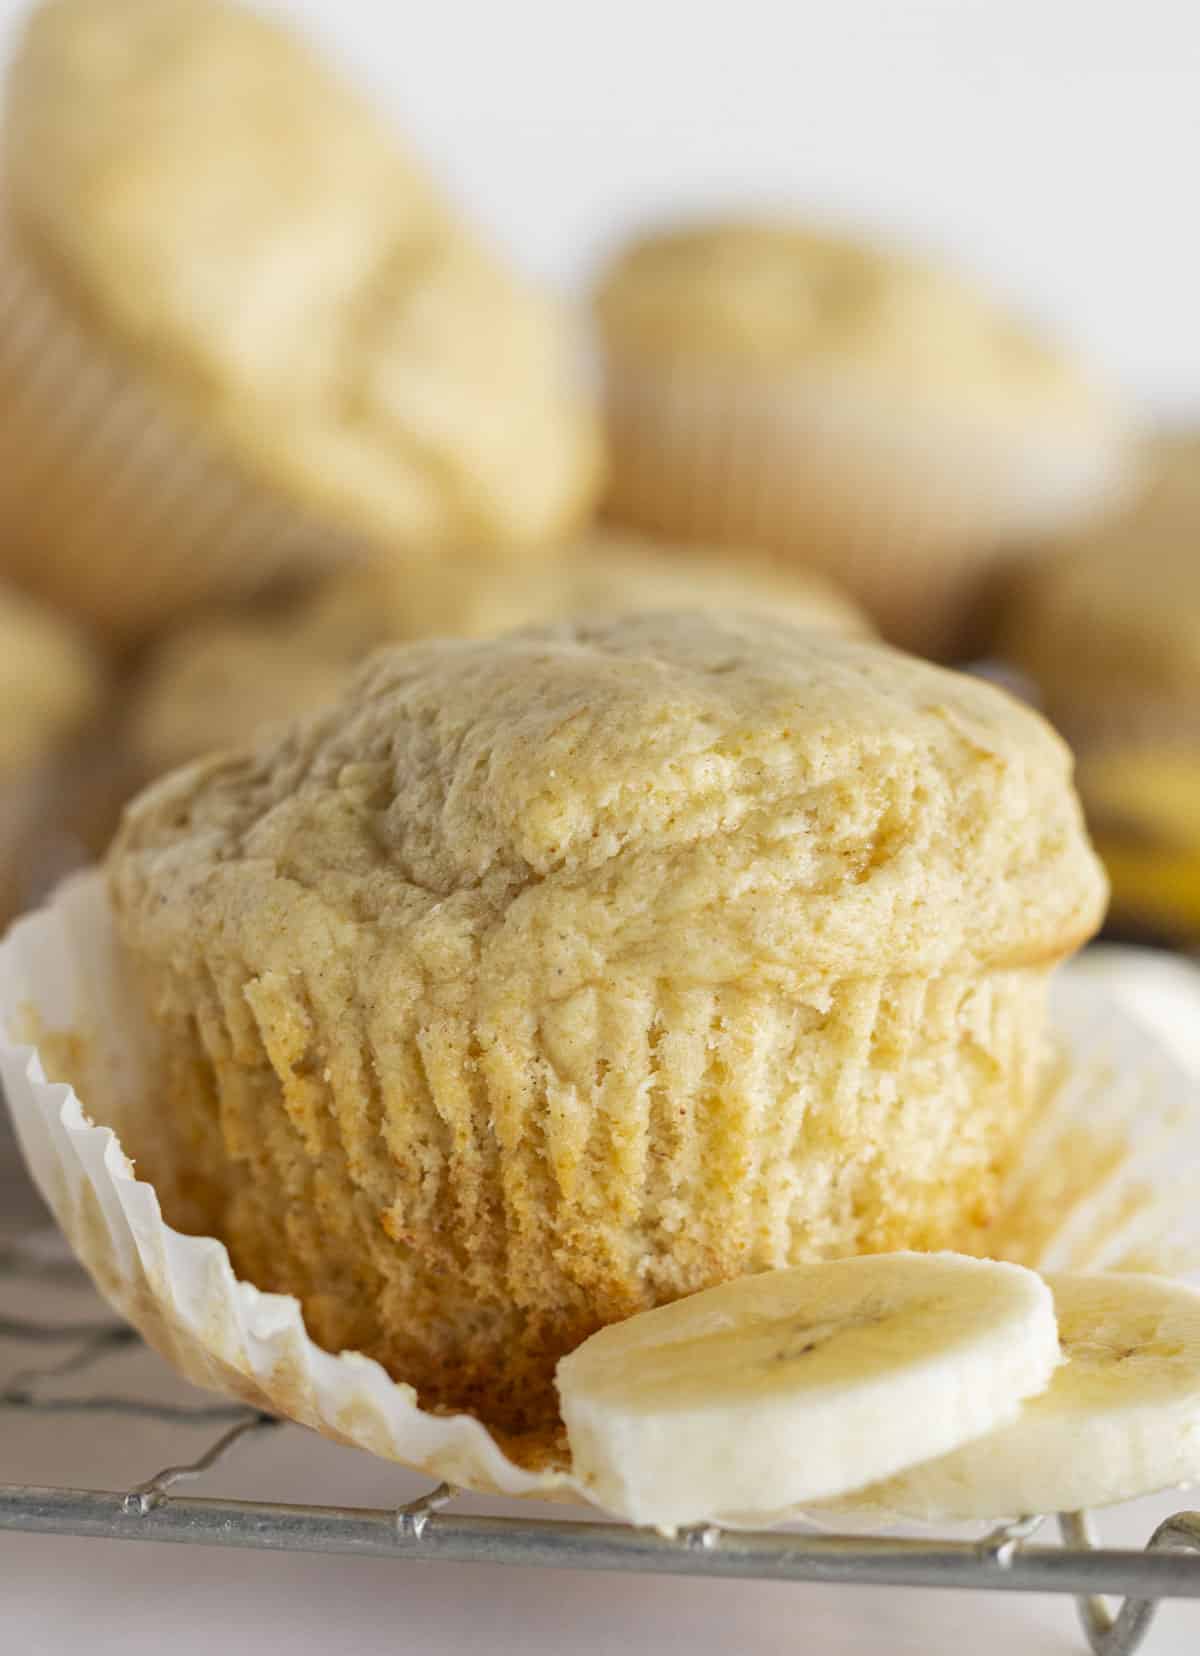 A Banana Bisquick Muffin without the cupcake wrapper.